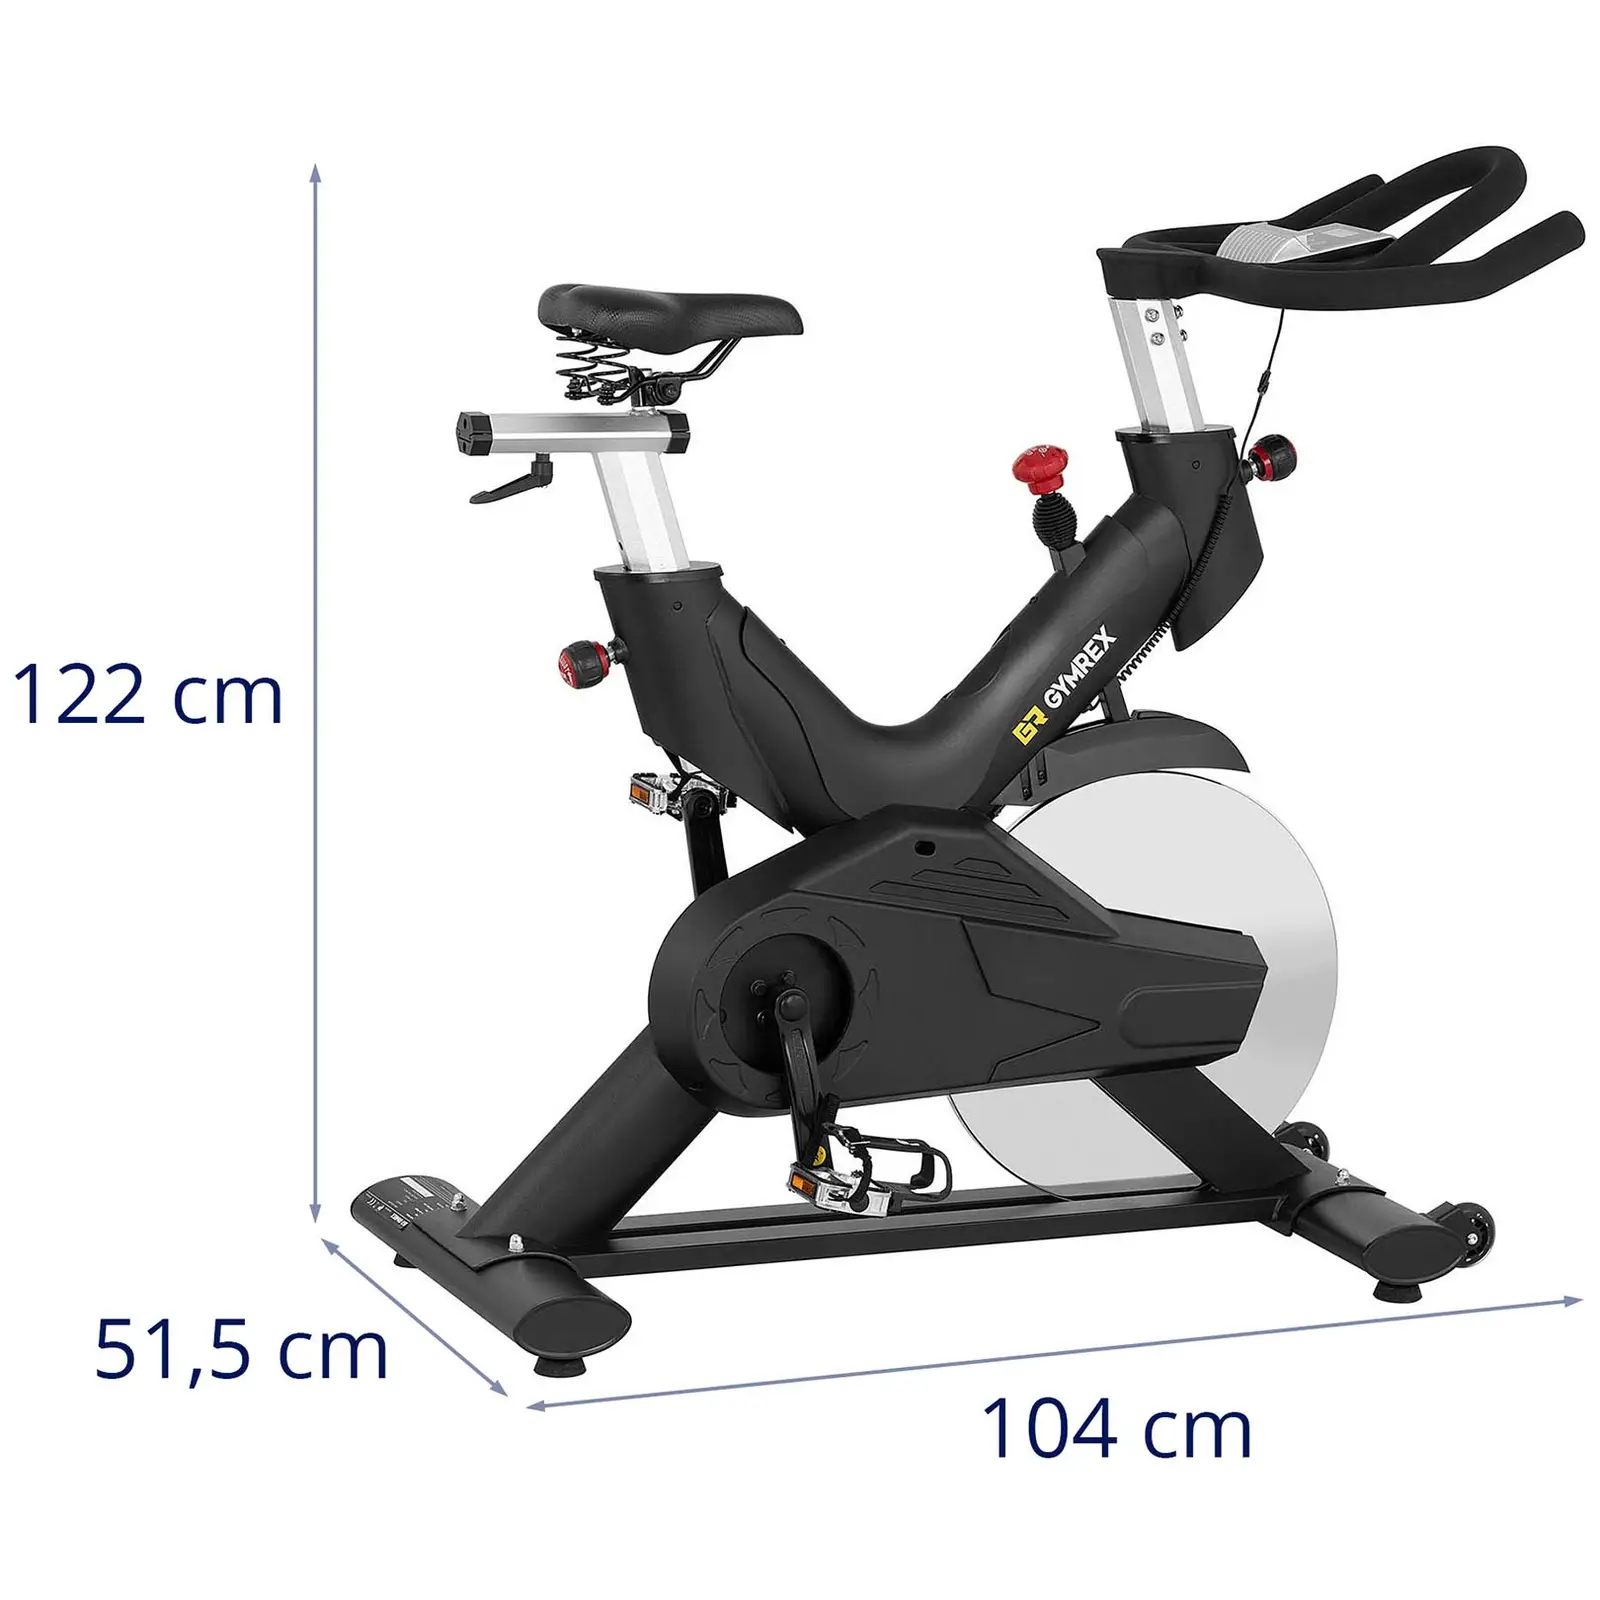 Factory second Stationary Bike - flywheel 20 kg - loadable up to 120 kg - LCD